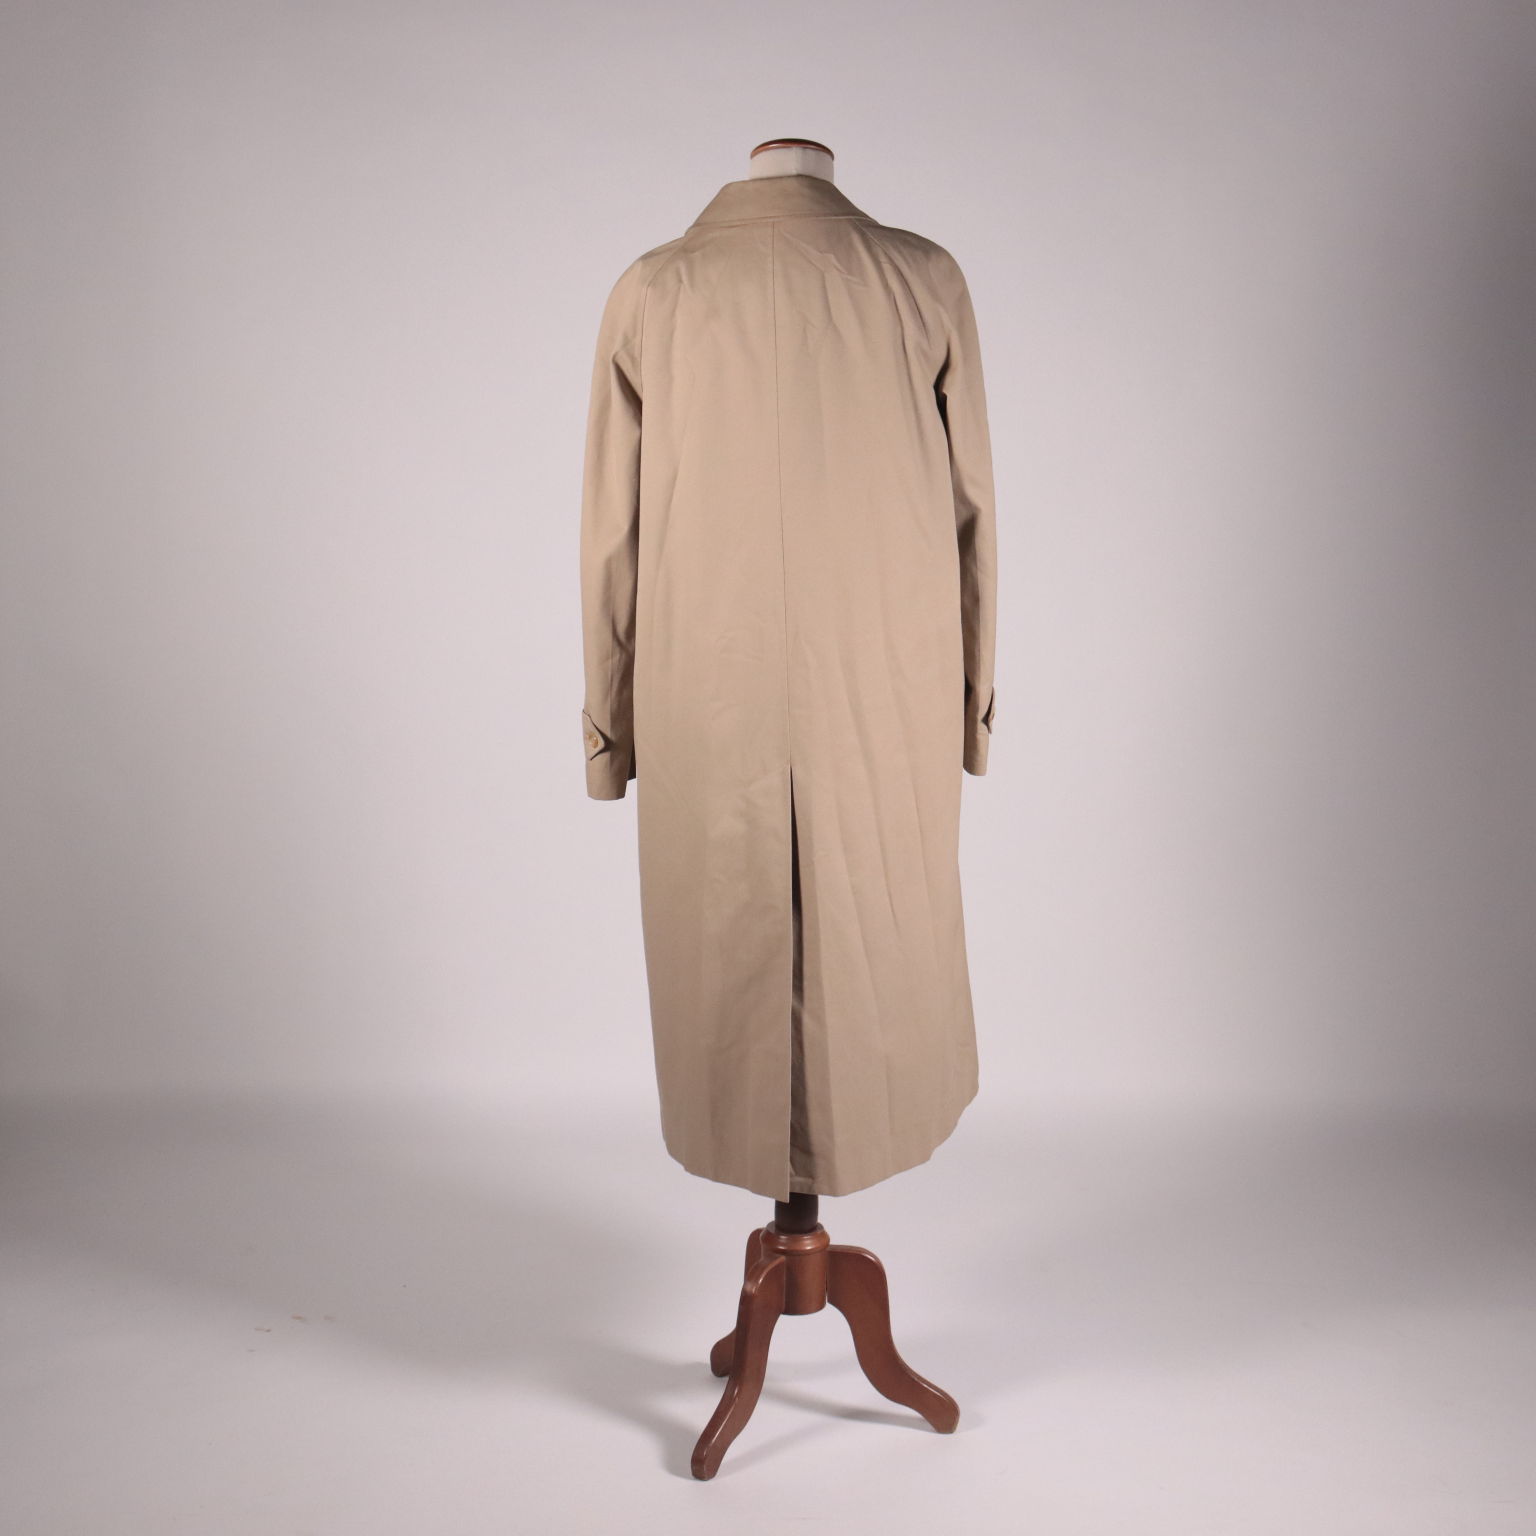 Burberry Vintage Trench Coat, Size M, Apparel, Vintage, dimanoinmano. It